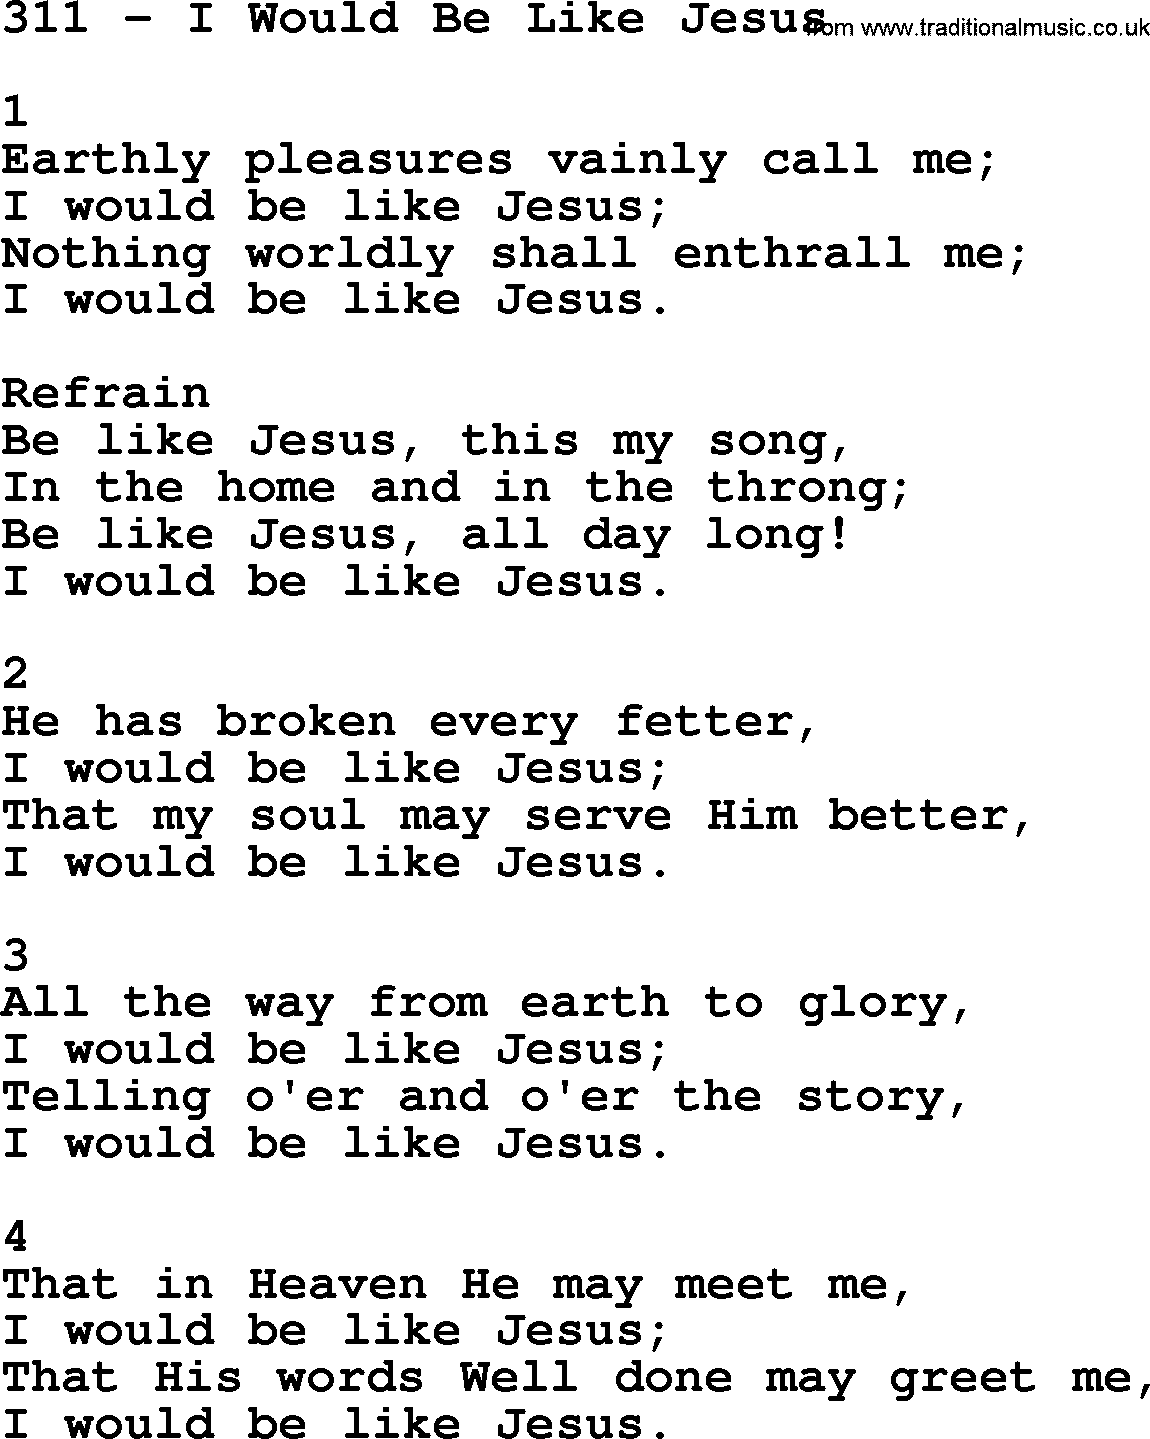 Complete Adventis Hymnal, title: 311-I Would Be Like Jesus, with lyrics, midi, mp3, powerpoints(PPT) and PDF,